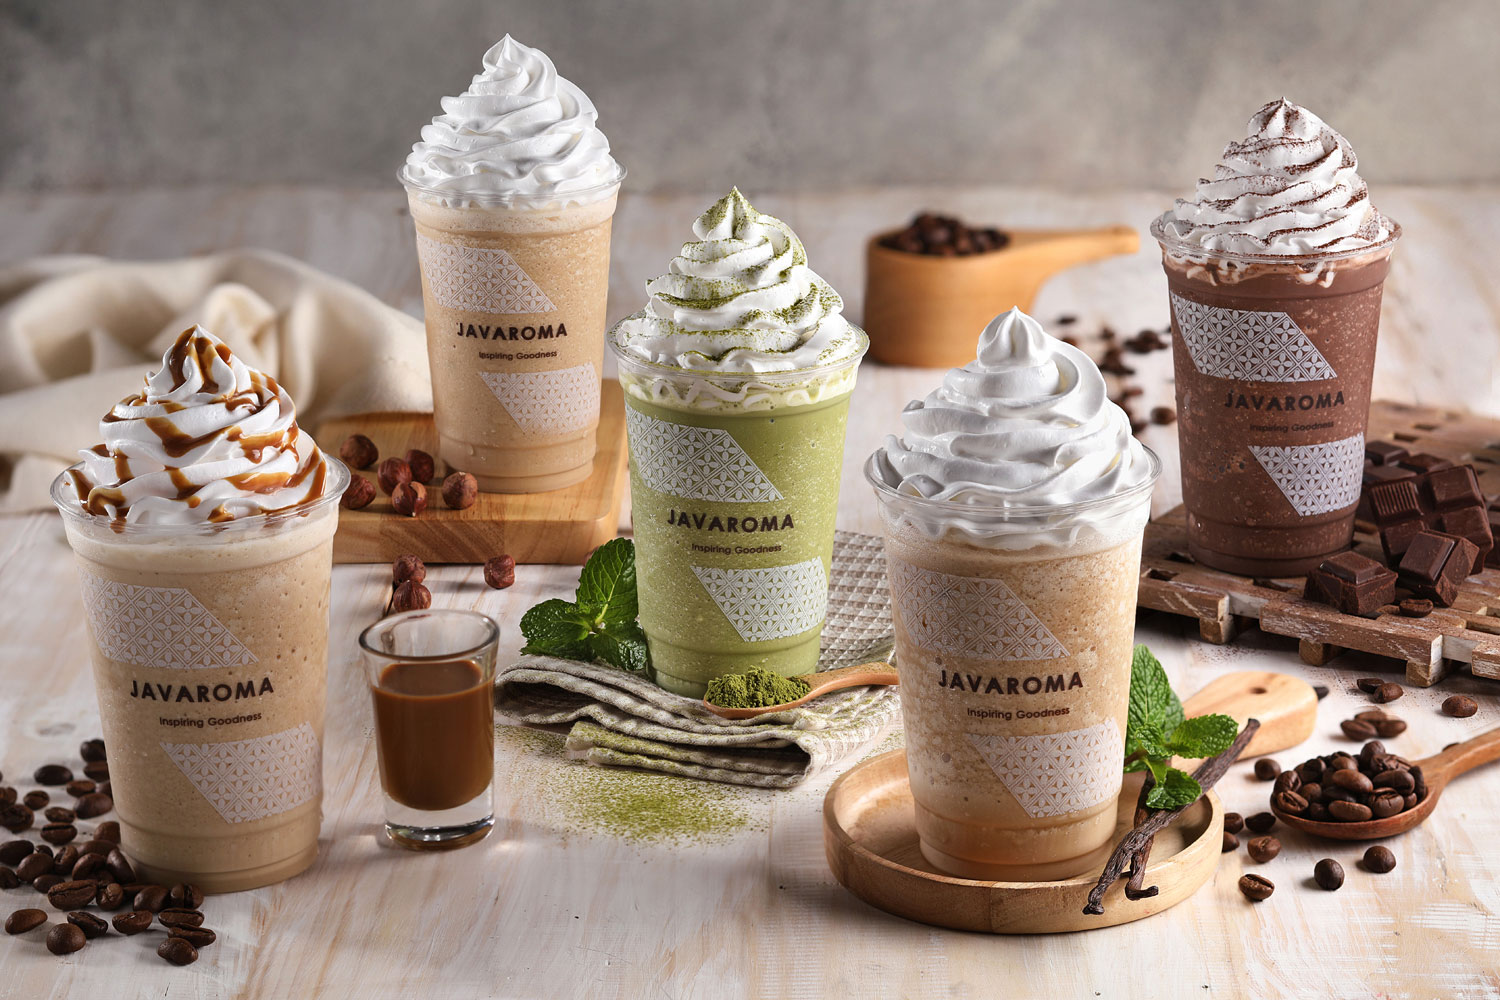 Just look at those mountain of happiness. And yes, the taste does as sweet as it looks, creamy and lots of fun. So, no matter how hard things were, have a frappe and be happy, folks!